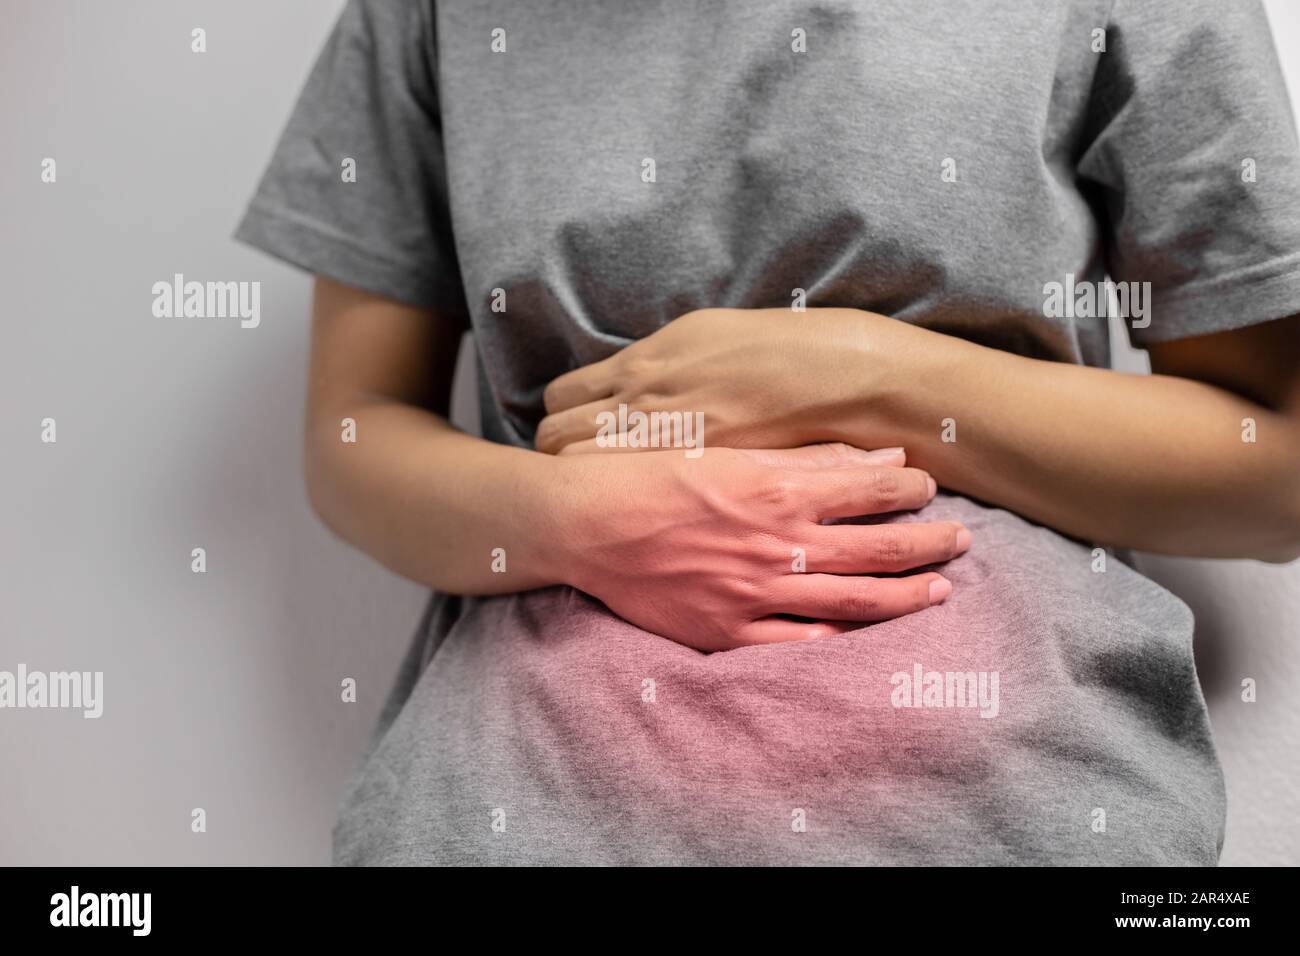 Causes and Risk Factors of Abdominal Pain